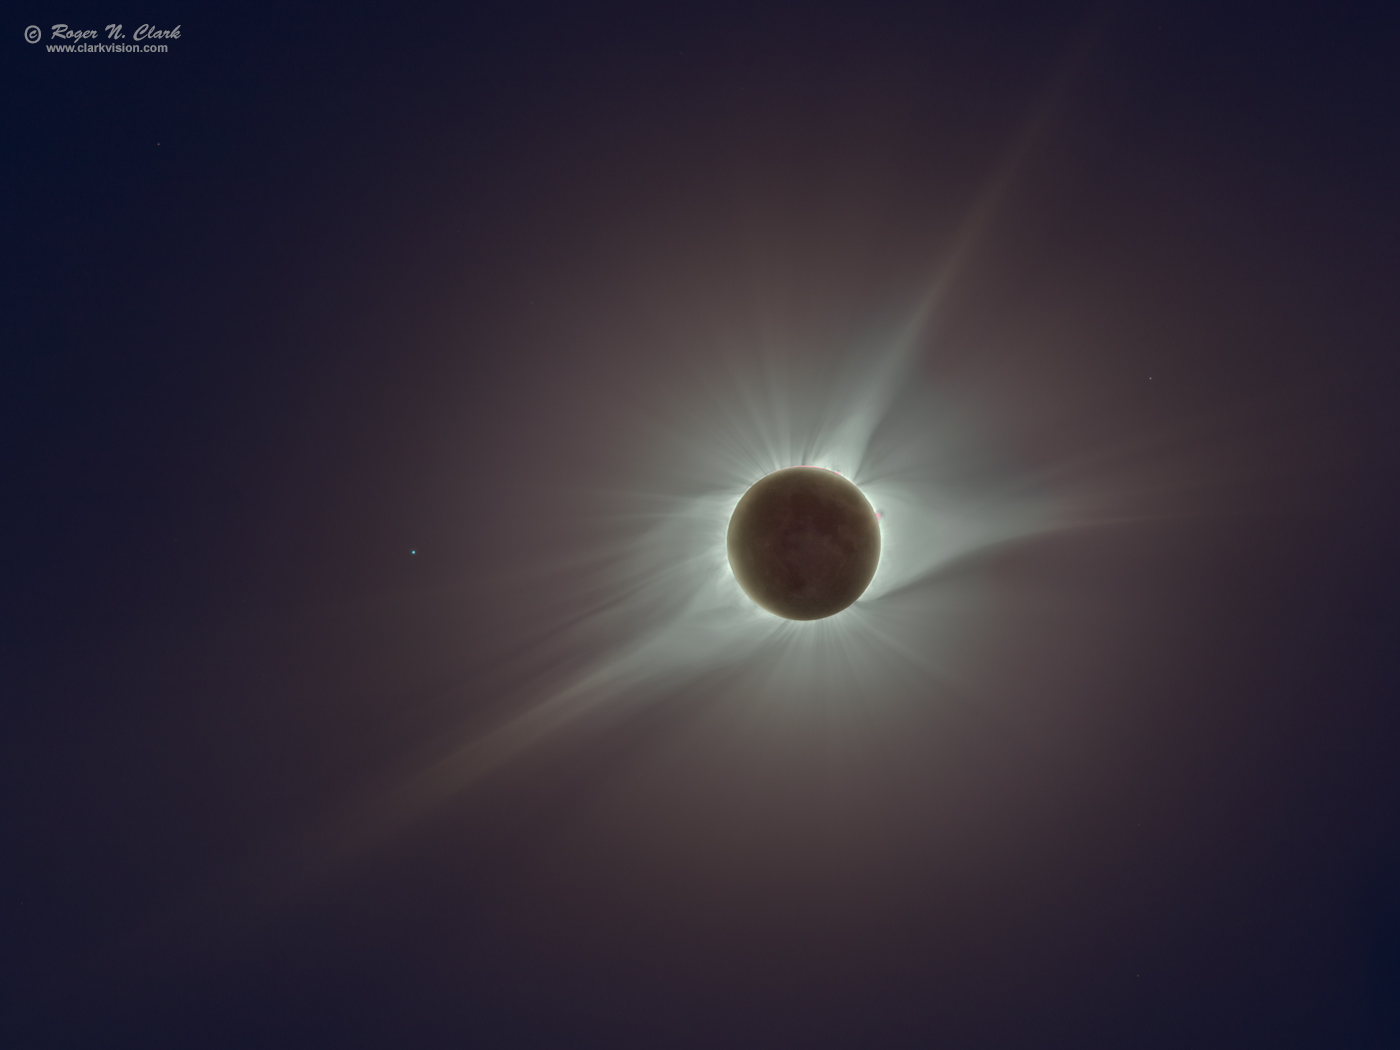 image solar-eclipse-total-rnclark-200+700mm.c08.21.2017.c-c2-0.5xs.jpg is Copyrighted by Roger N. Clark, www.clarkvision.com